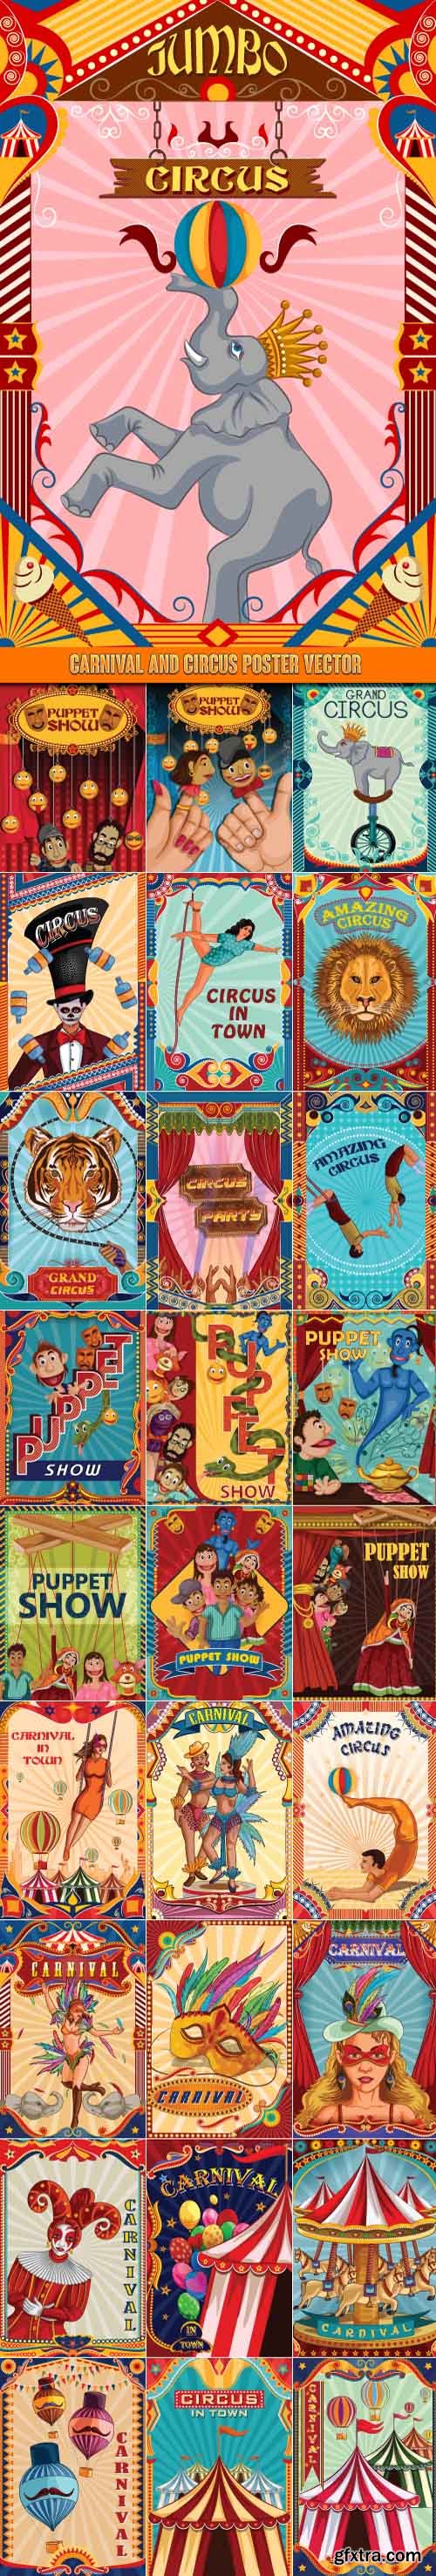 Carnival and circus poster vector